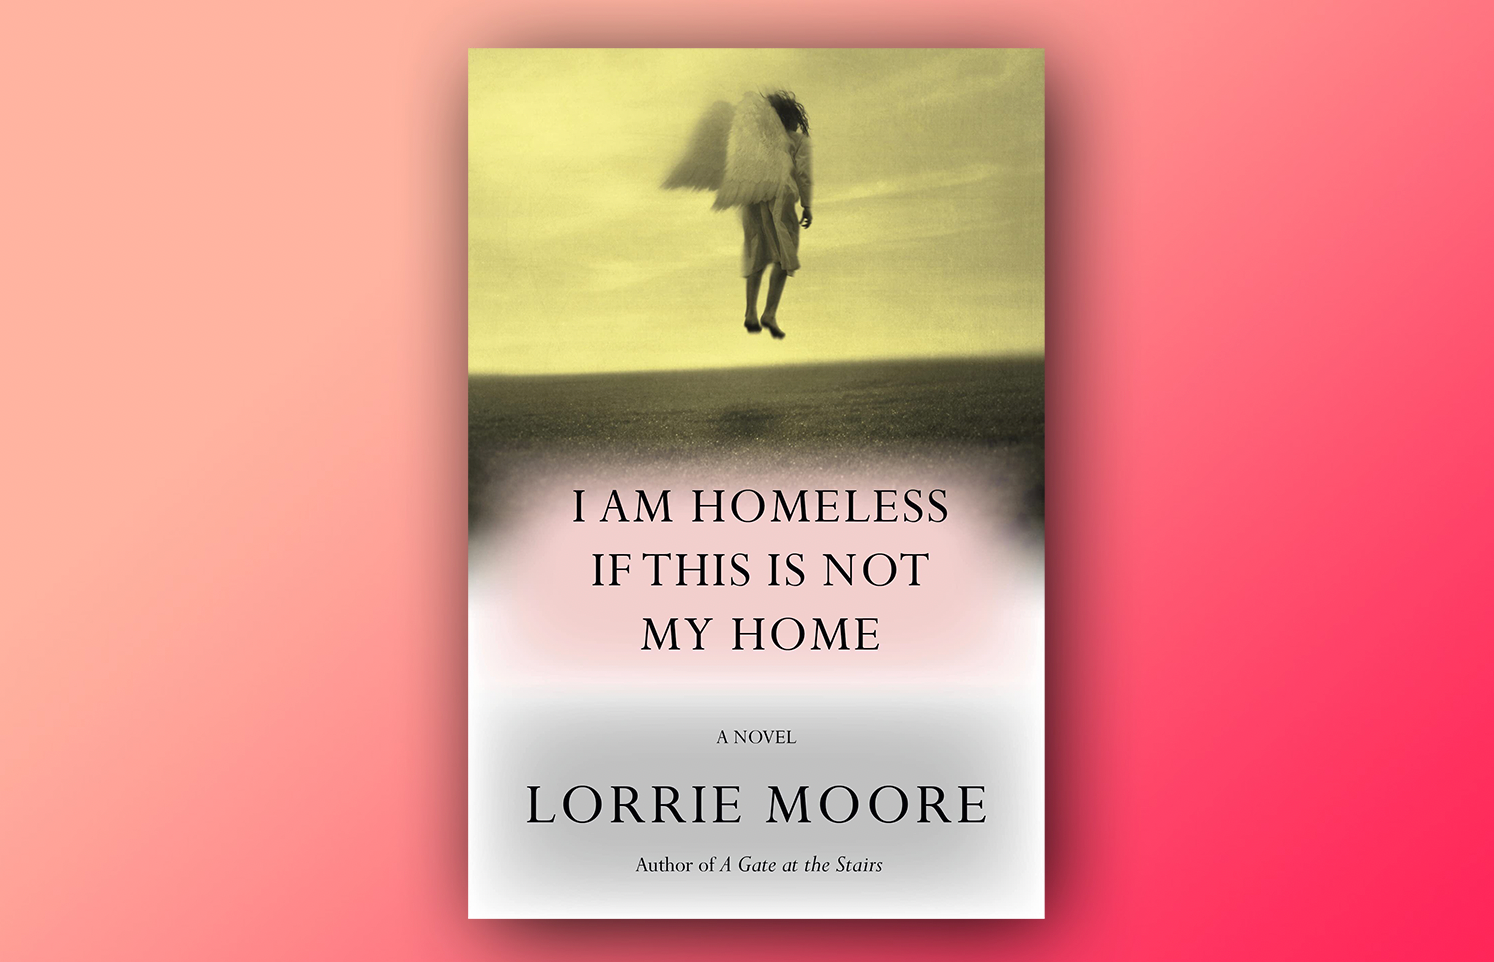 Lorrie Moore – Time’s Most Anticipated Books of 2023